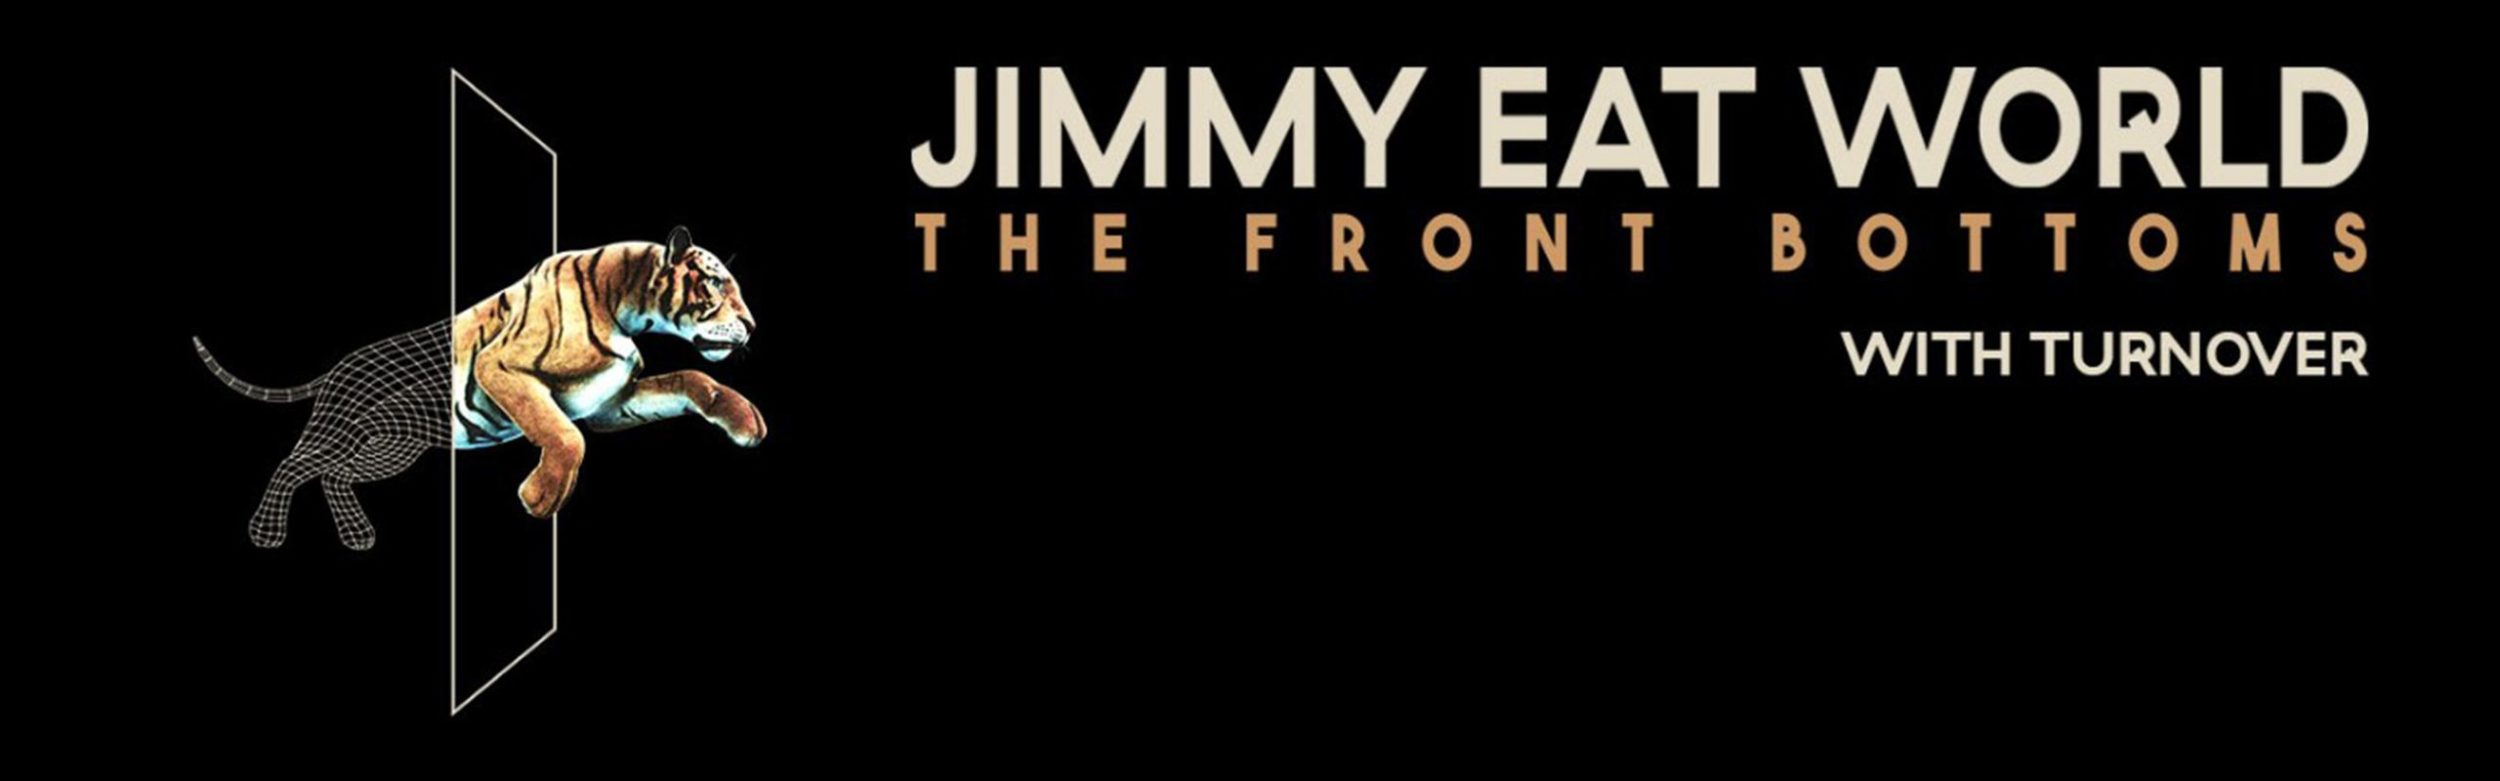 Jimmy Eat World and The Front Bottoms - With Turnover